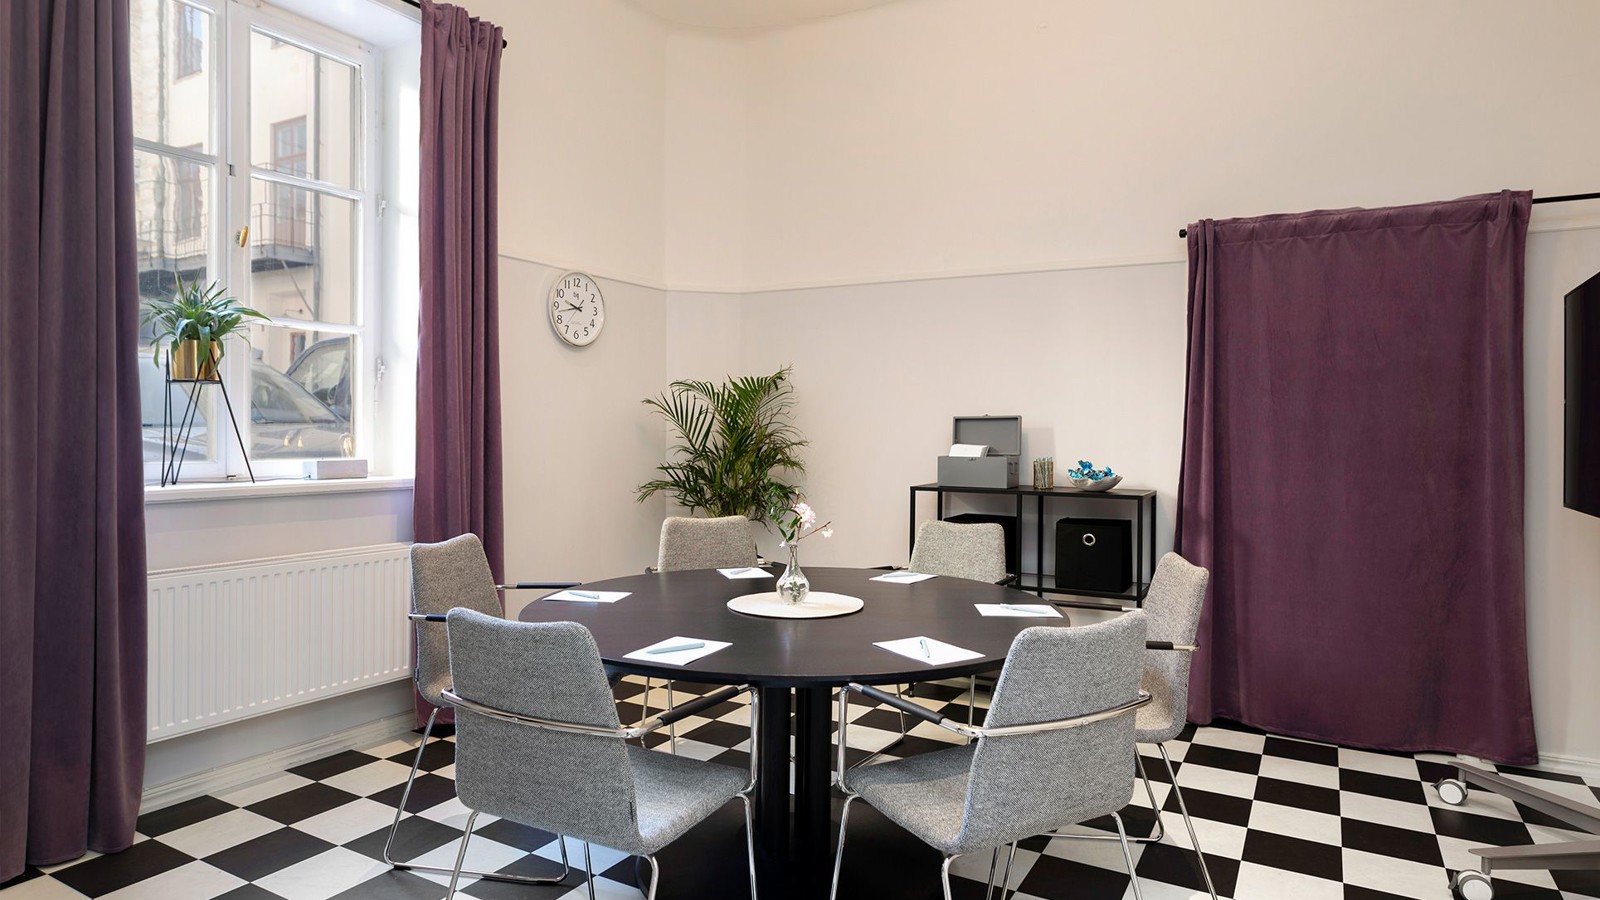 Conference room with checkerboard floor, round table and large window